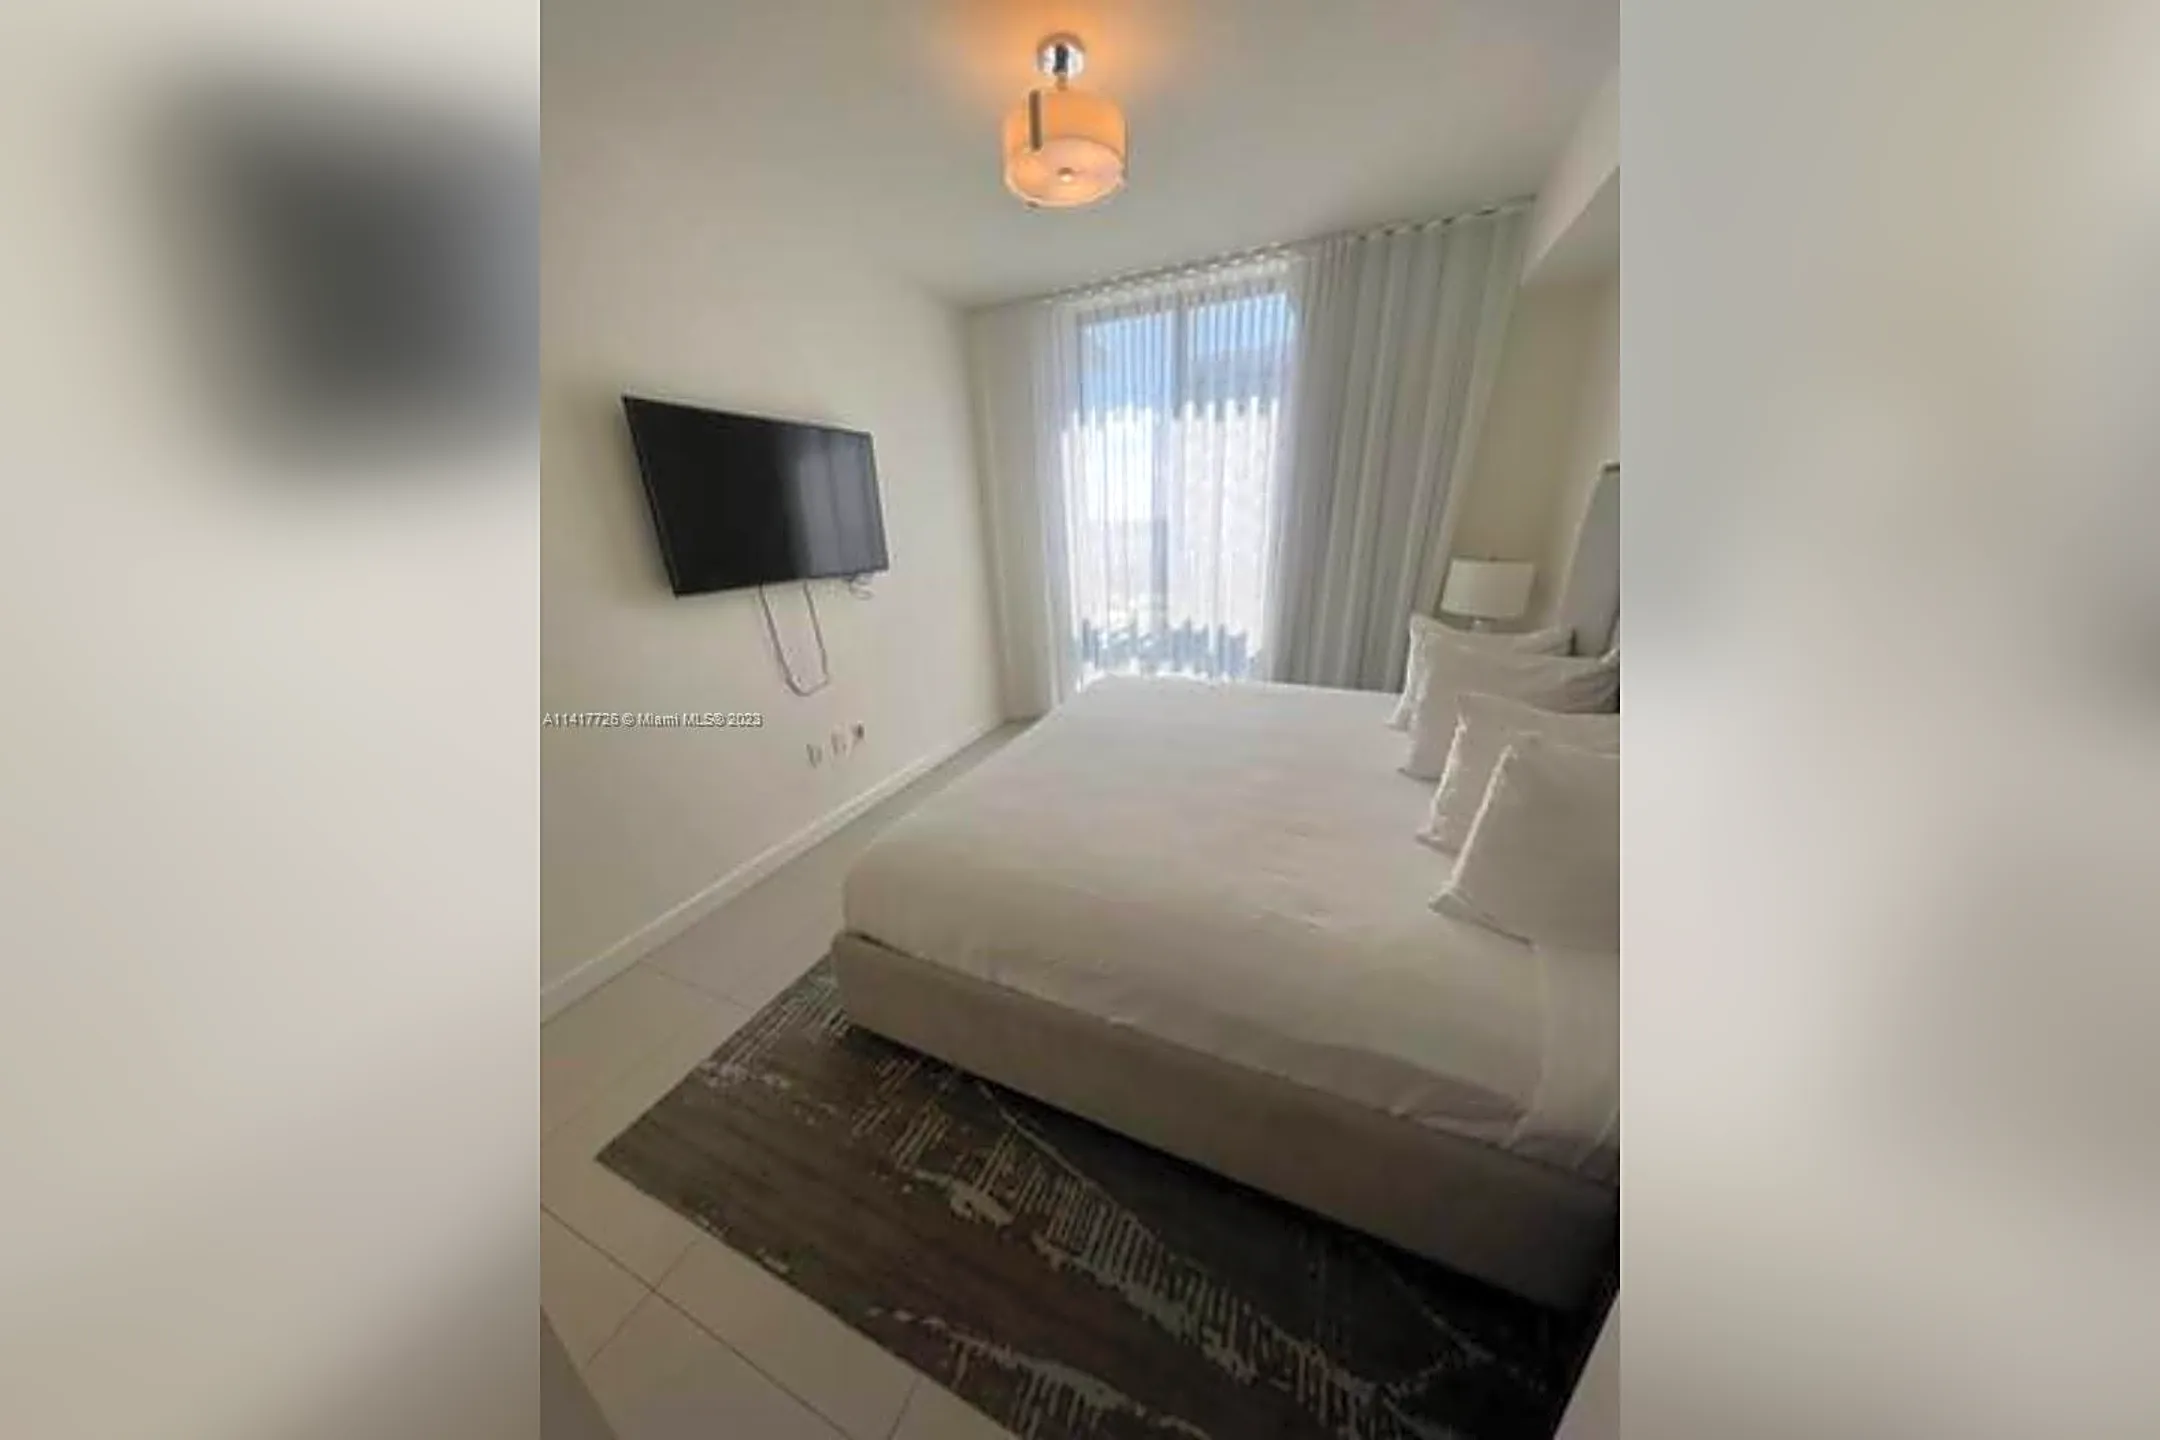 Bedroom - 5350 NW 84th Ave #1208 - Doral, FL